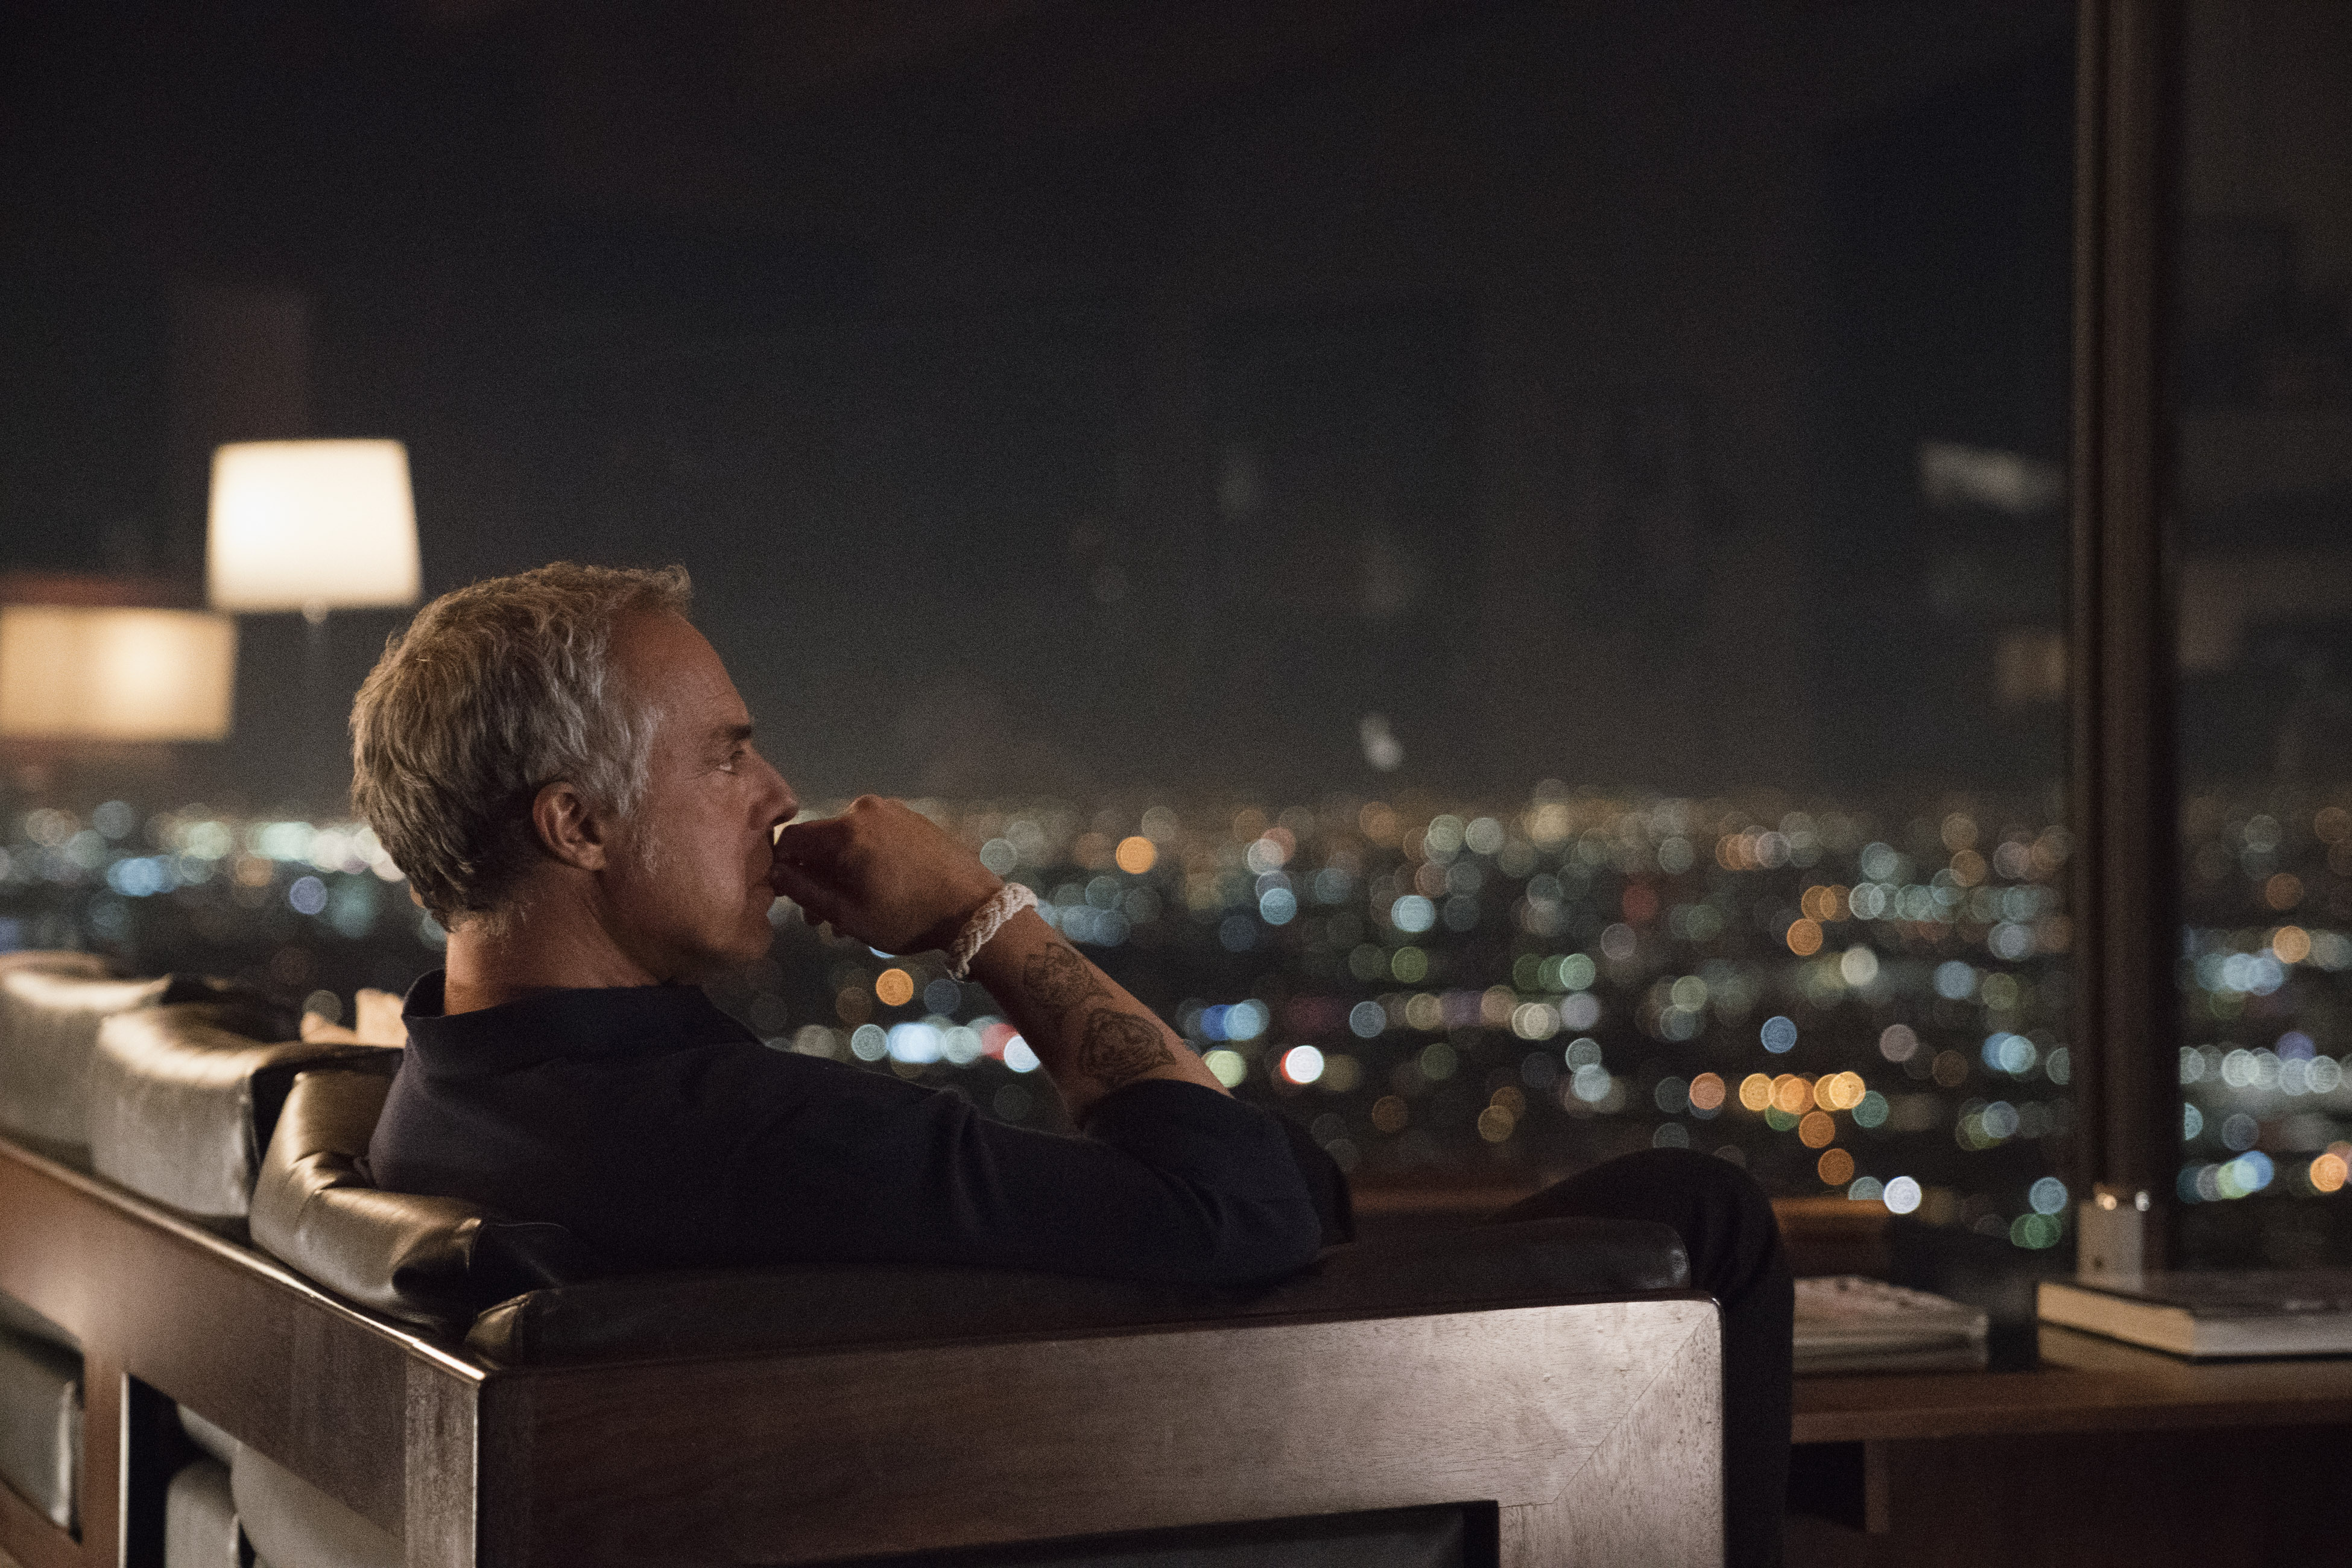 ART OF THE CUT with the editors of Amazon Studios' "Bosch" 3